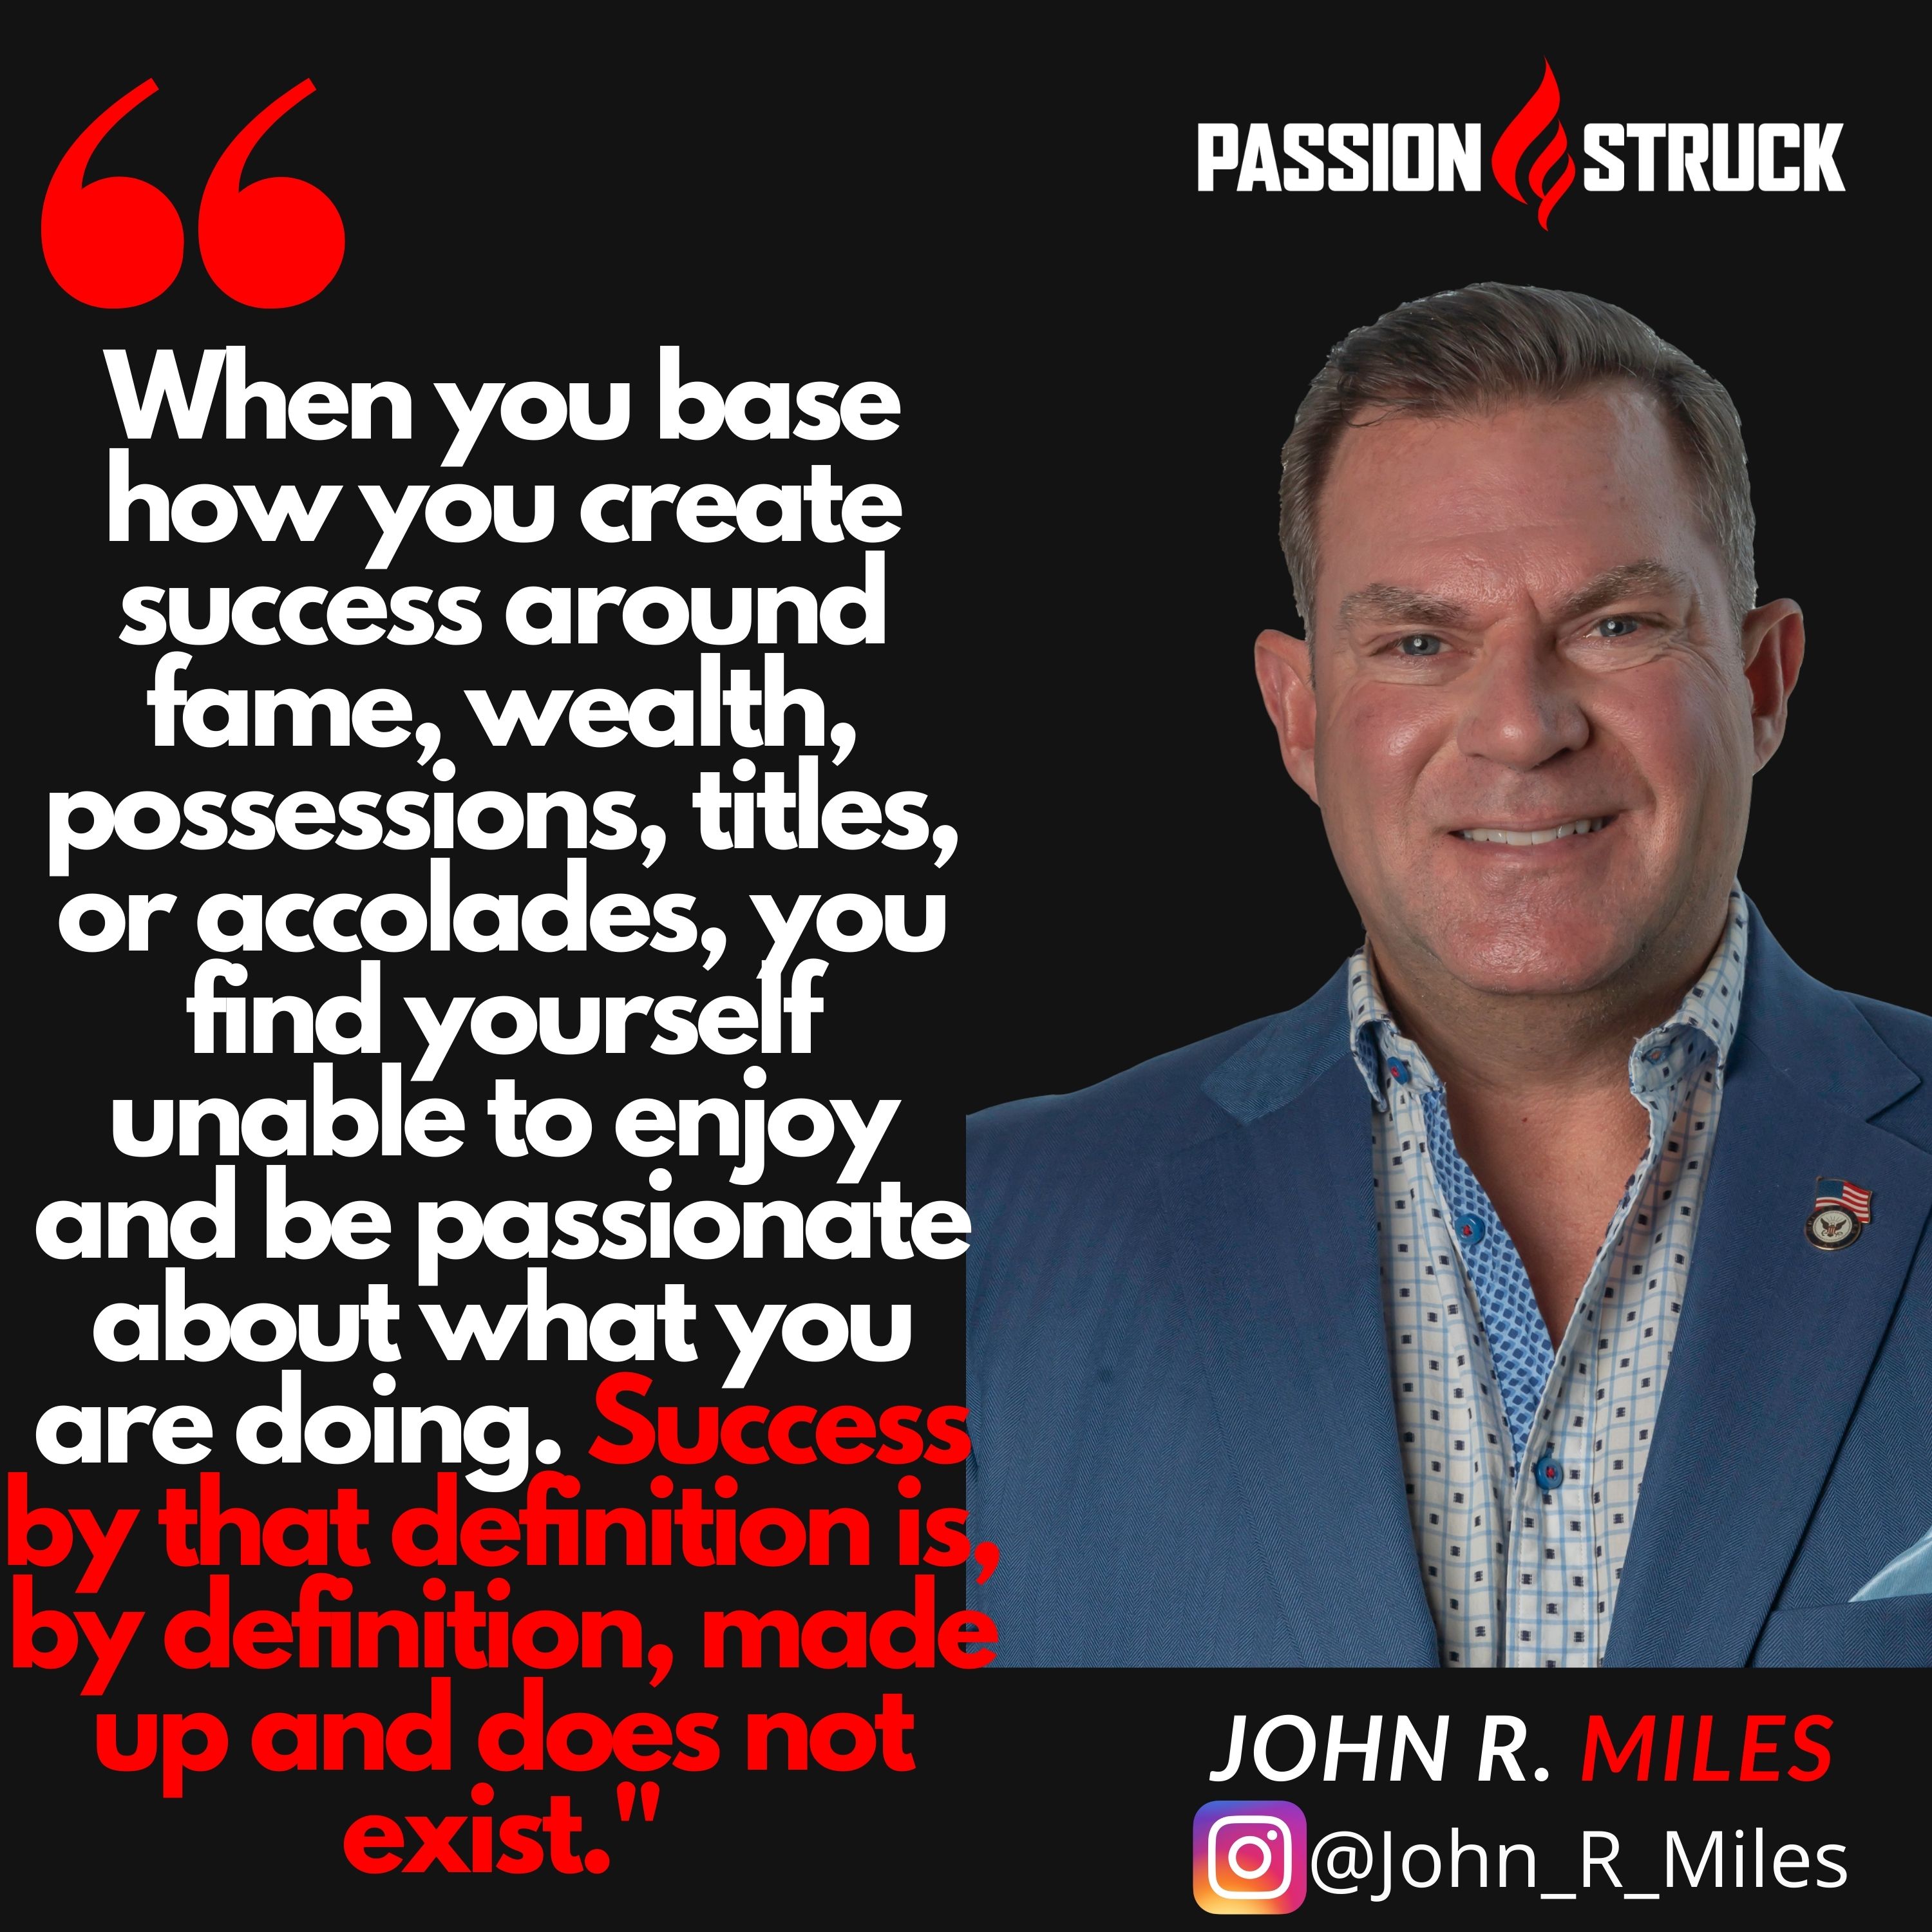 Quote by John R. Miles on how to create success